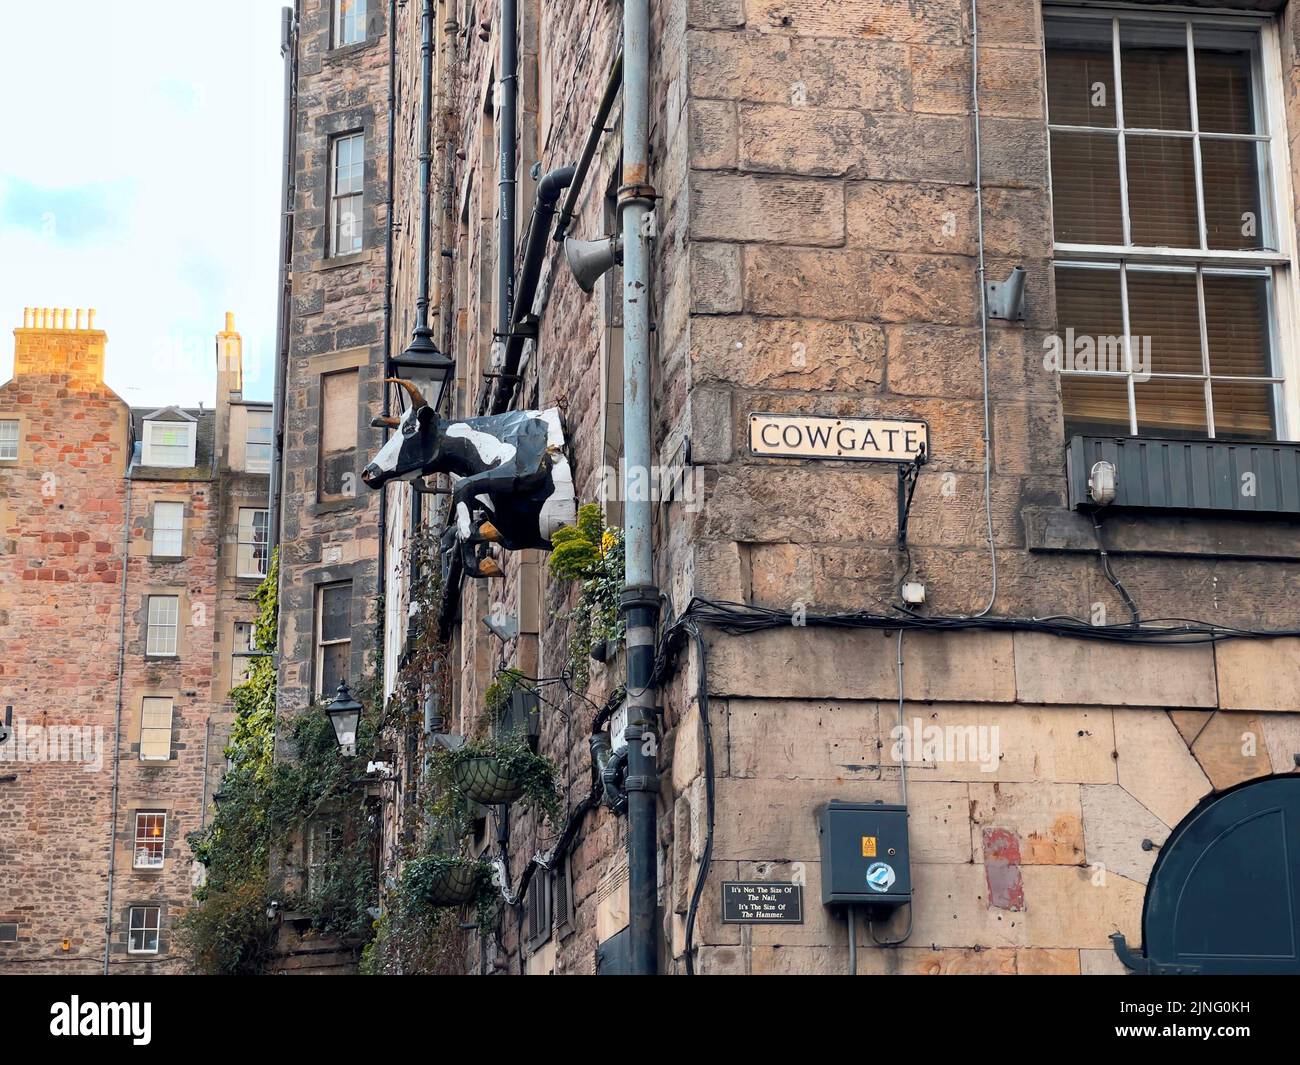 The old buildings in Cowgate, Edinburgh Stock Photo